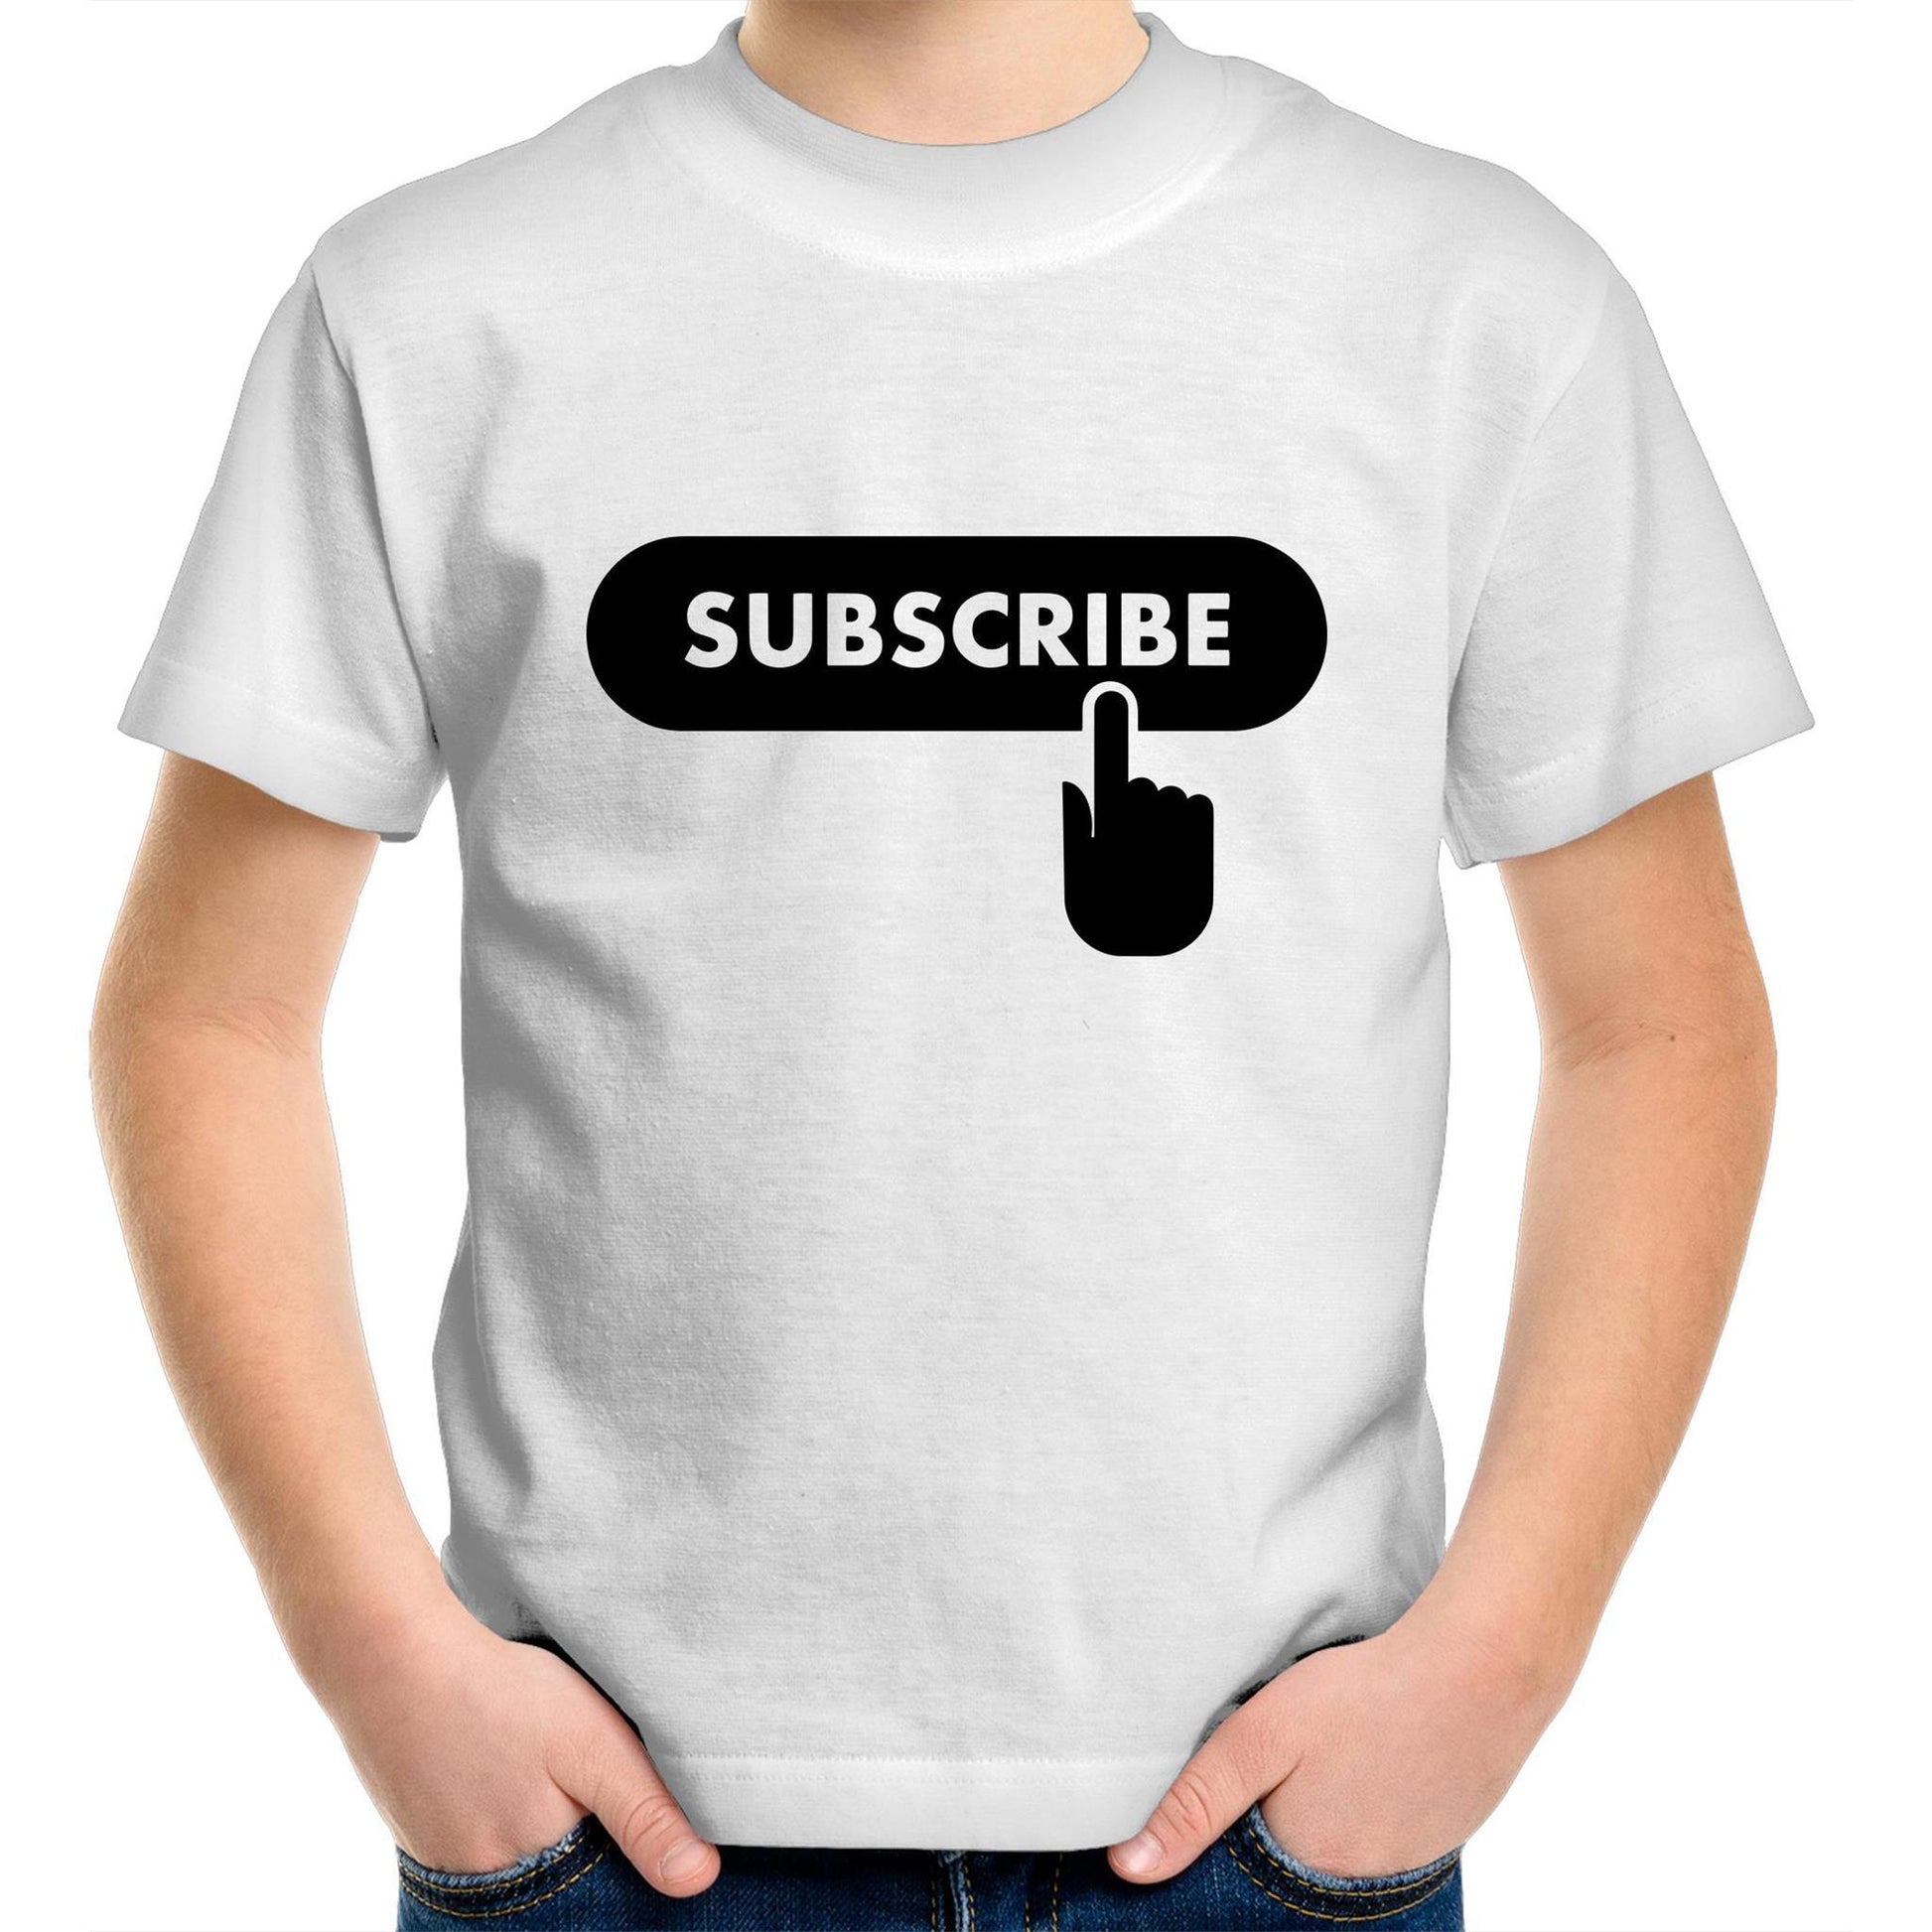 Subscribe - Kids Youth Crew T-Shirt White Kids Youth T-shirt Funny